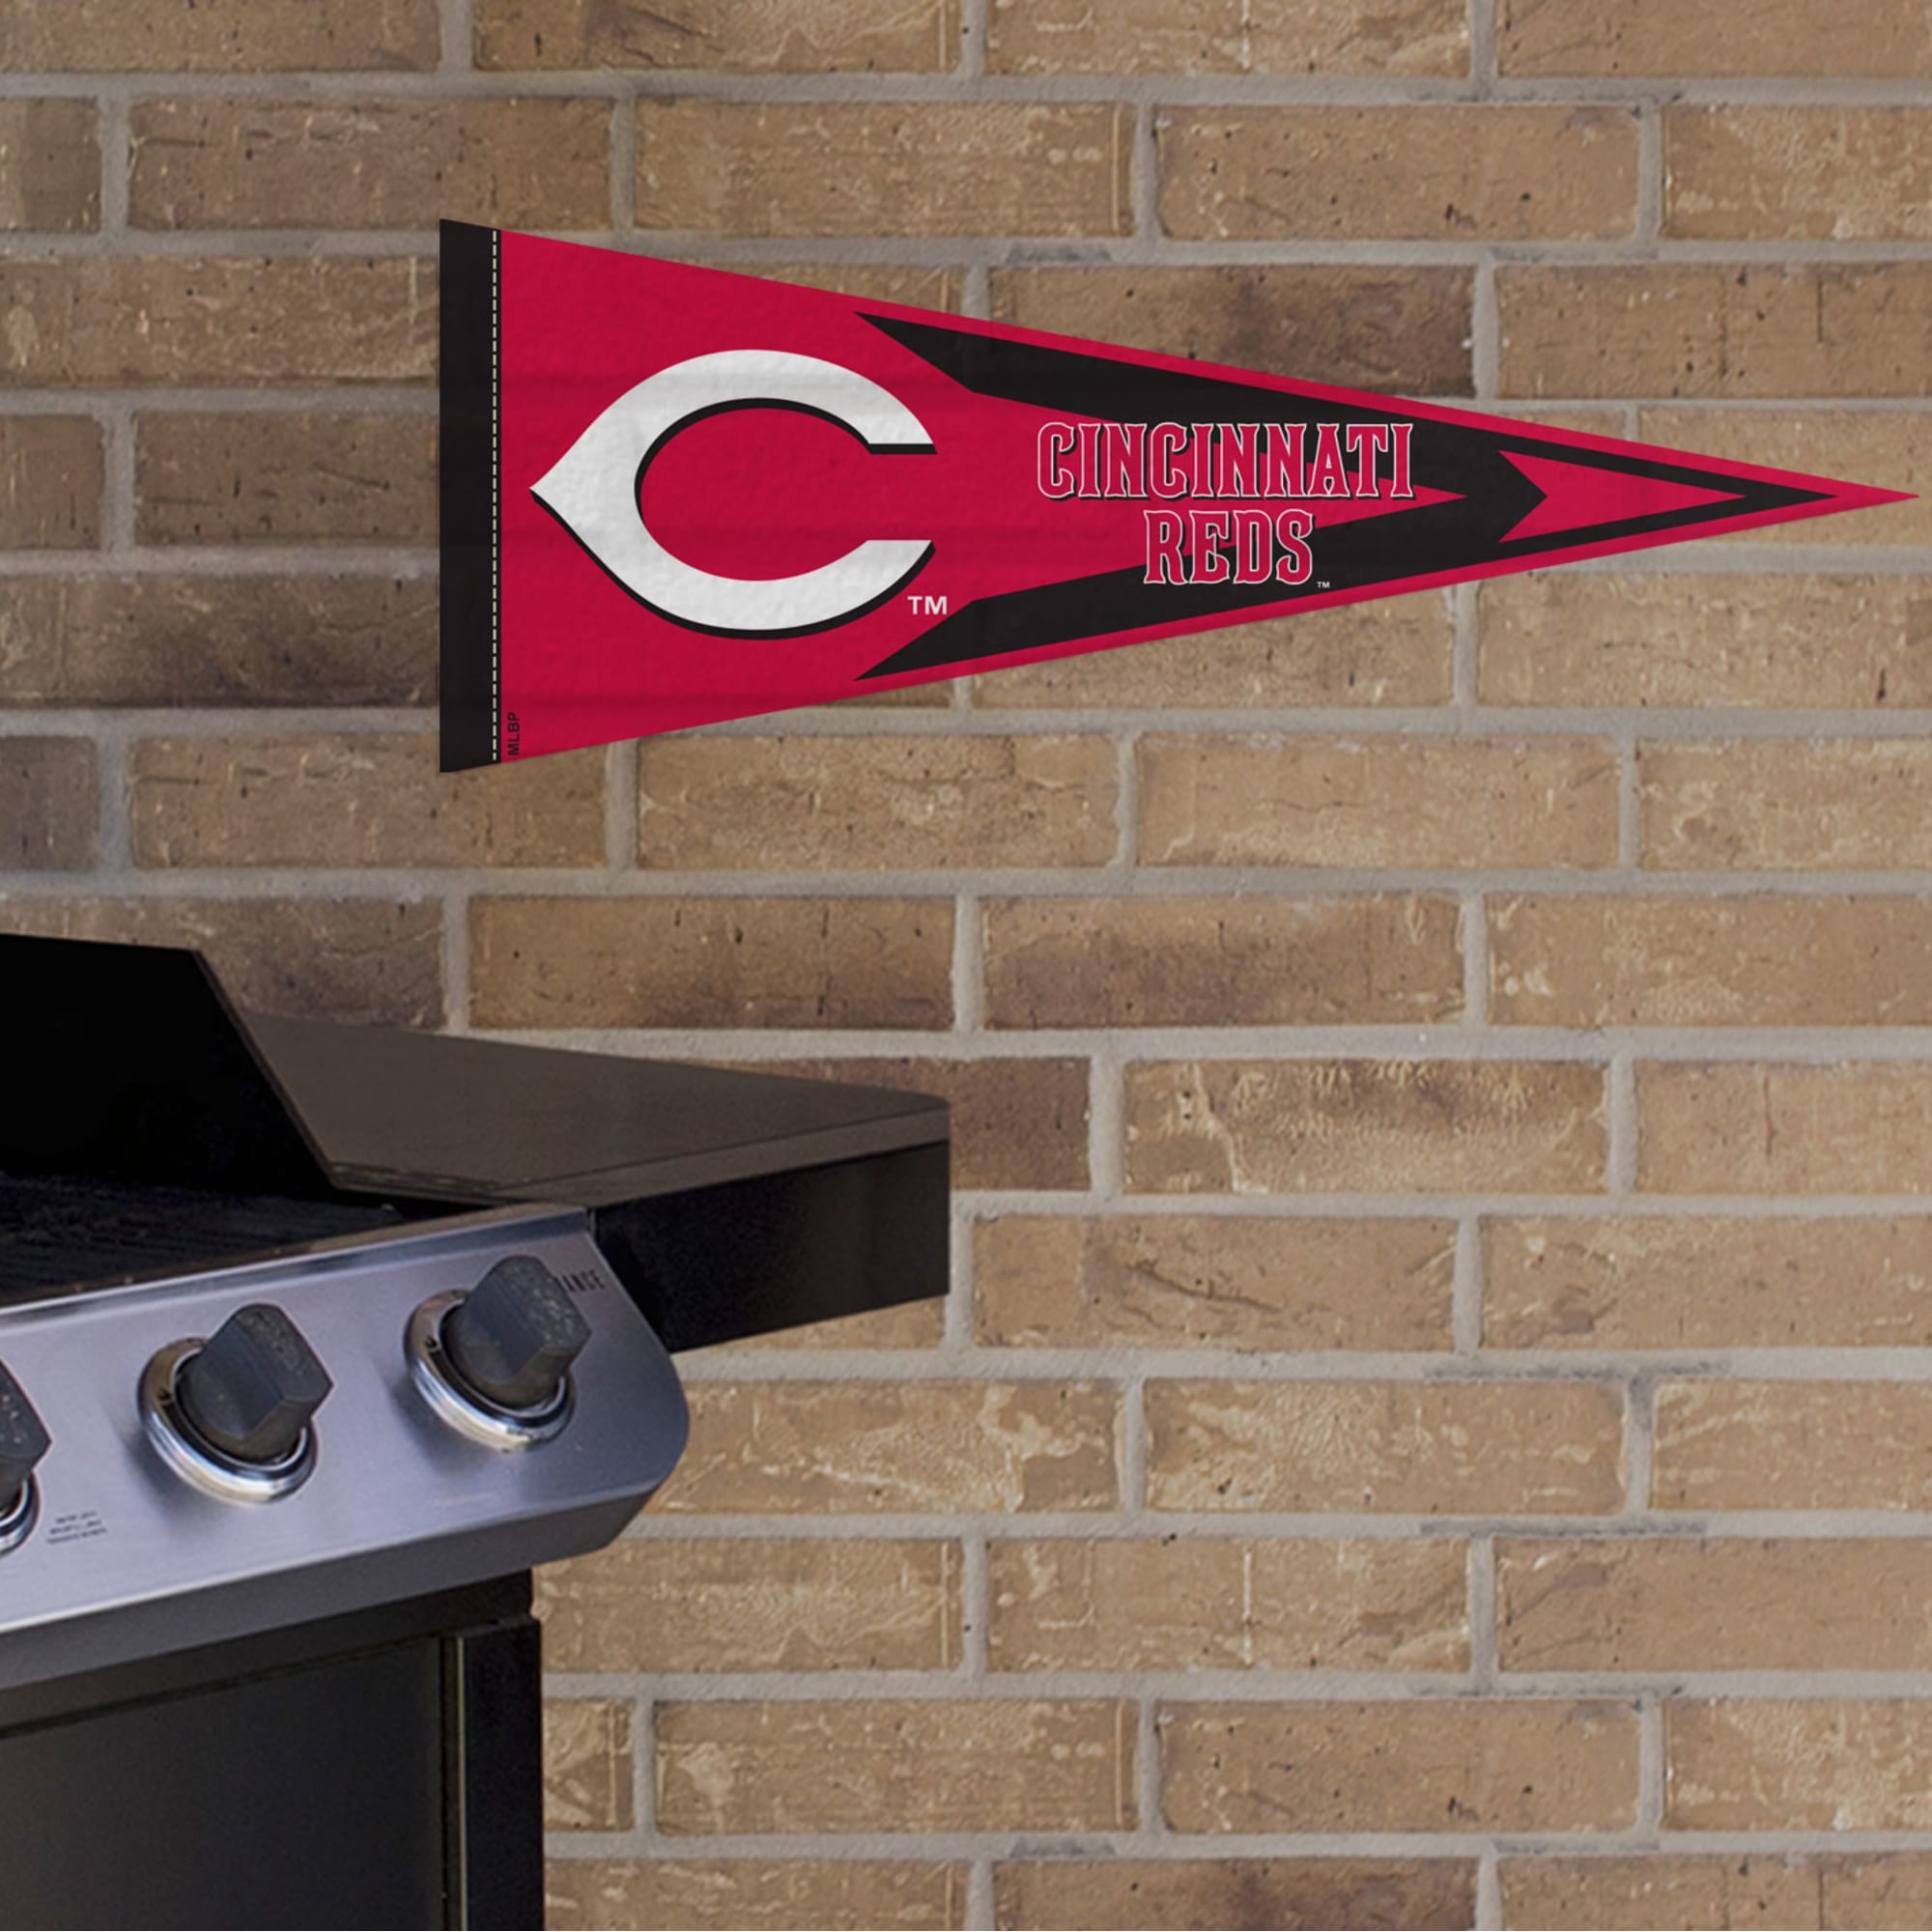 Cincinnati Reds: Pennant - Officially Licensed MLB Outdoor Graphic 24.0"W x 9.0"H by Fathead | Wood/Aluminum